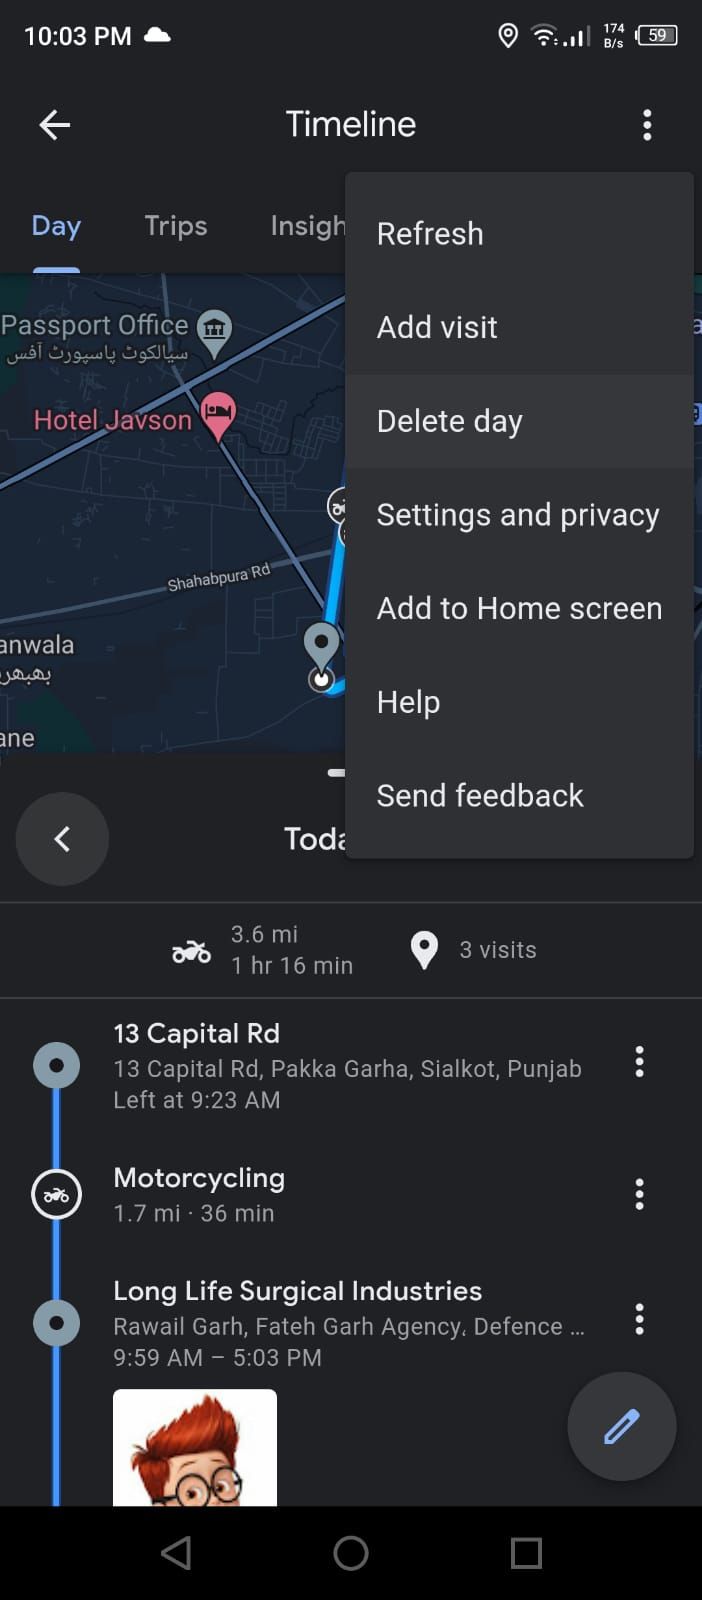 Delete Day Option in the Timeline Settings in the Google Maps App